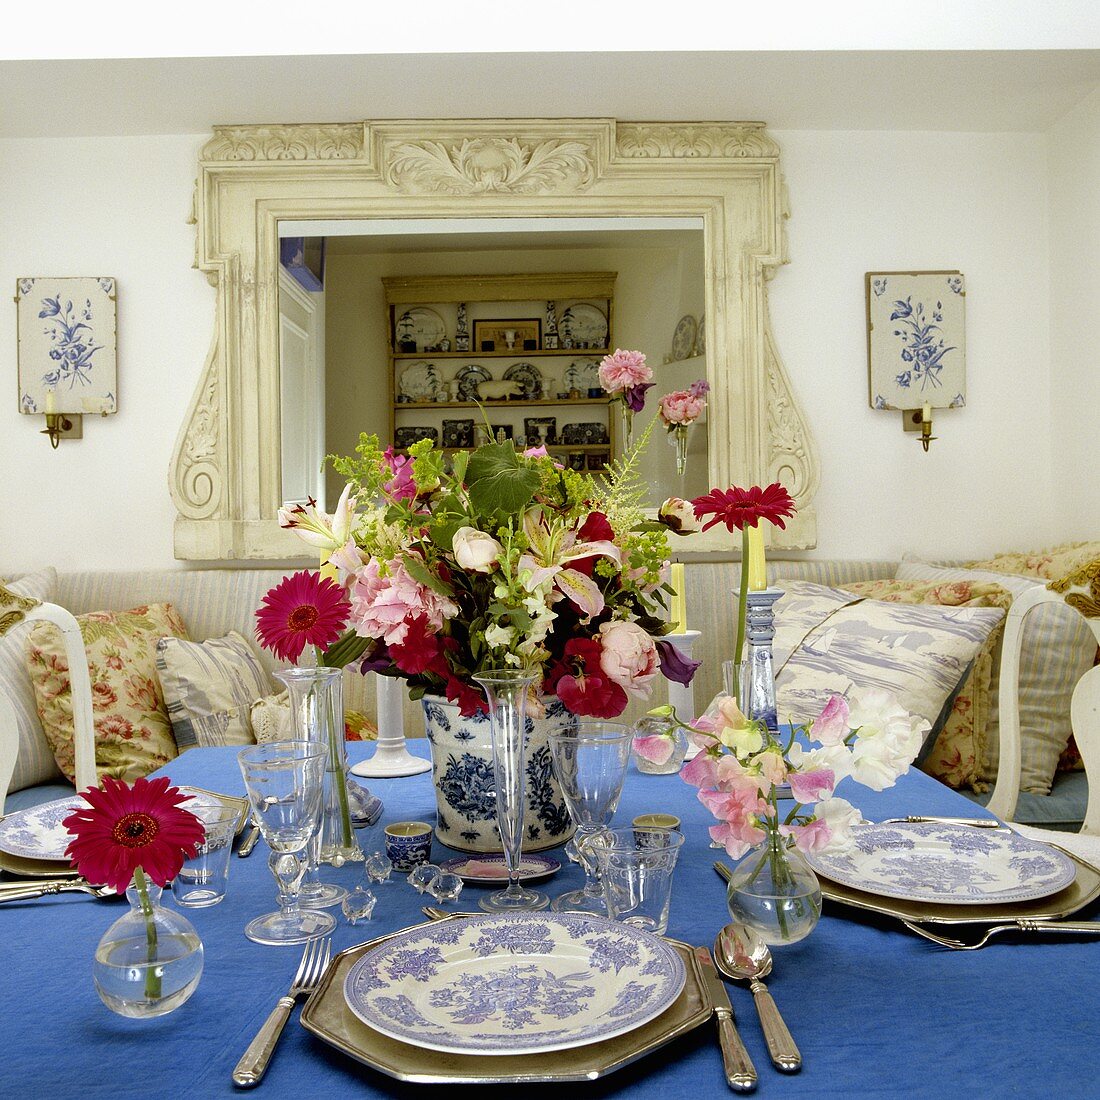 A table laid with silver cutlery, flowers and a blue tablecloth